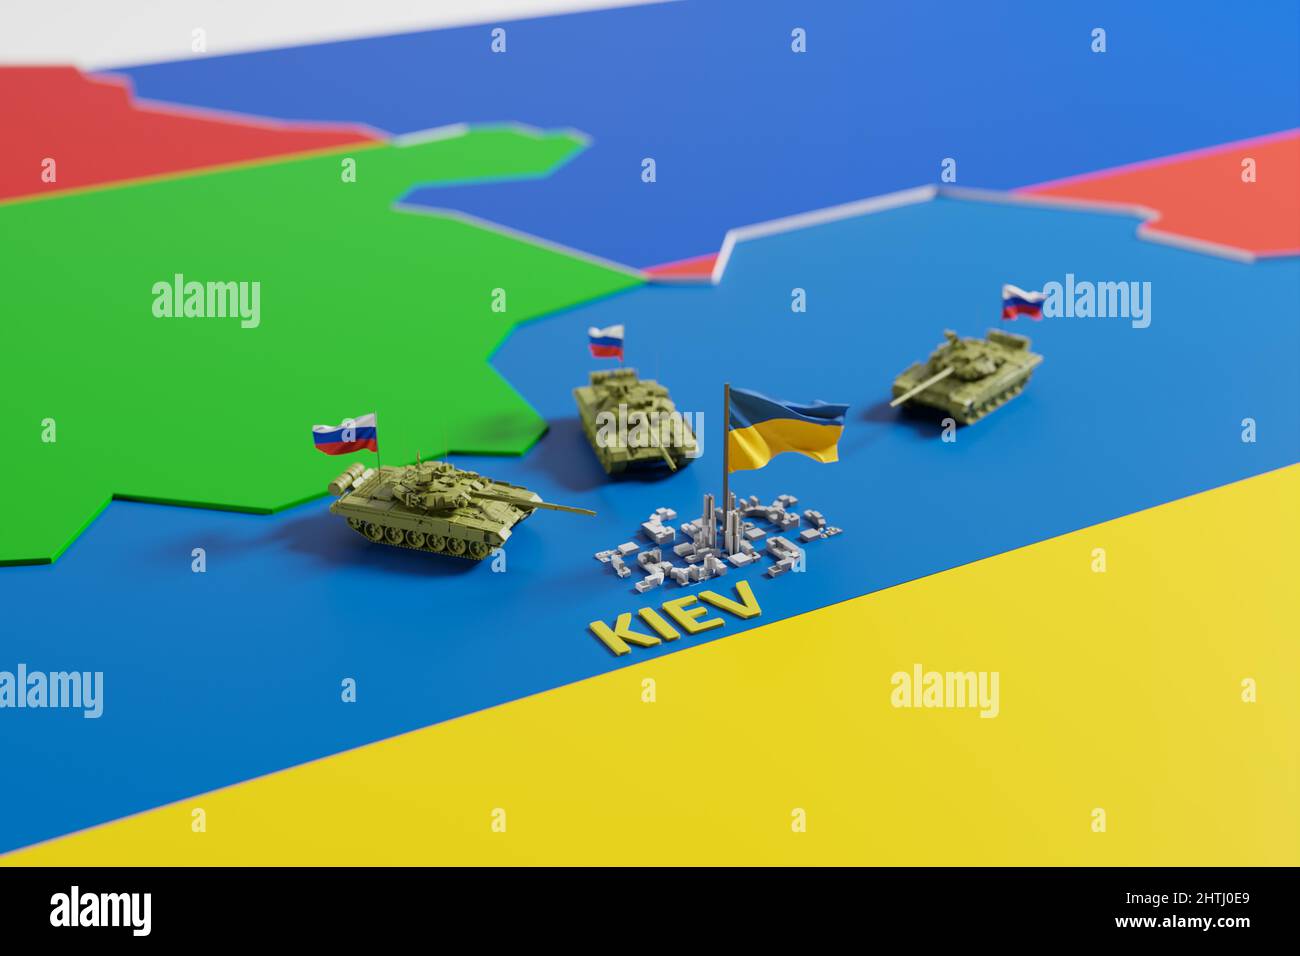 War in Ukraine. Russian army and tanks attacking the city of Kiev in Ukraine. Conflict escalation. 3D rendering. Stock Photo